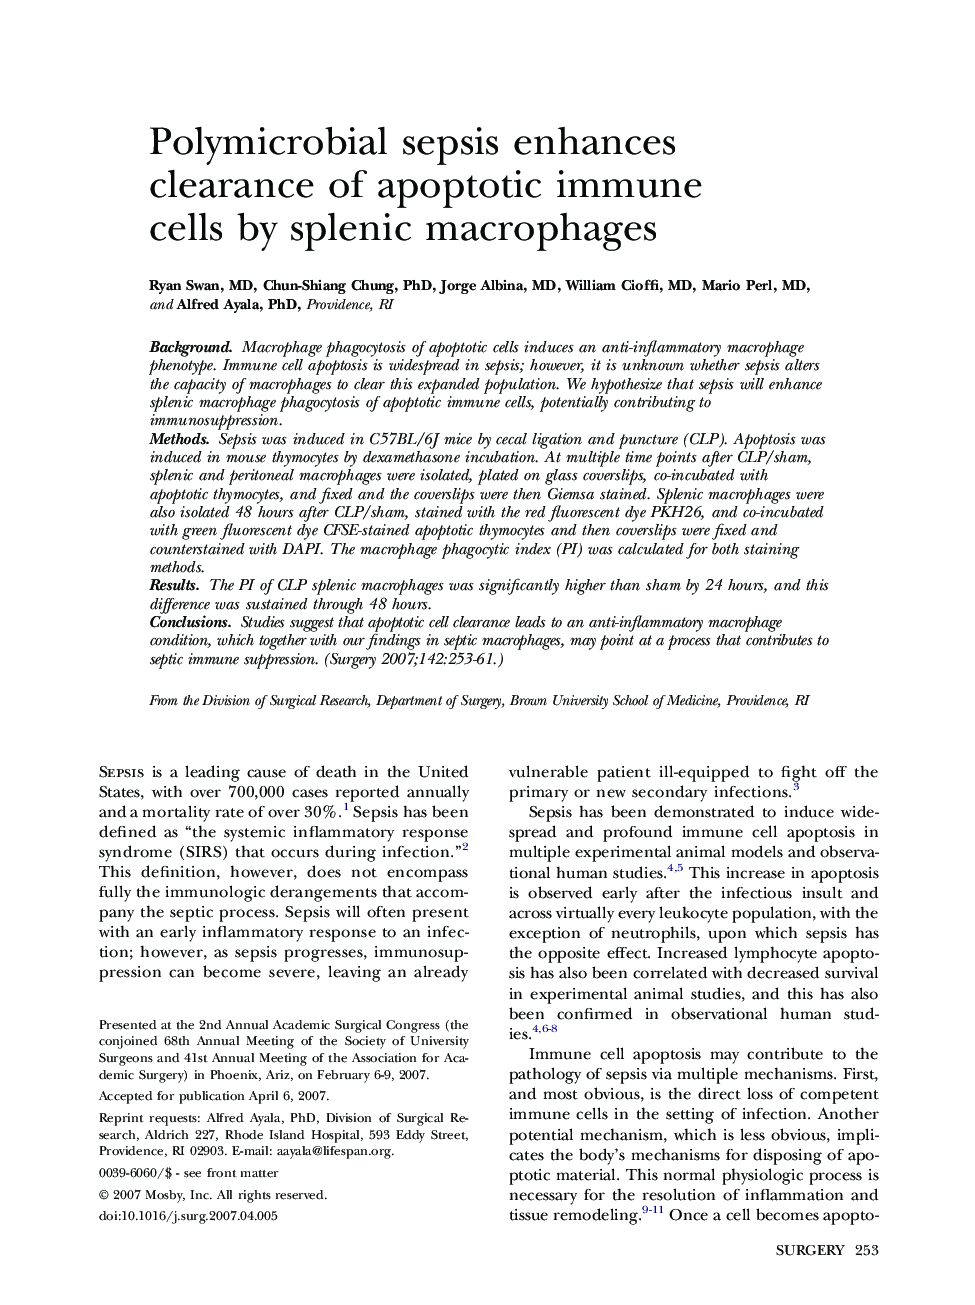 Polymicrobial sepsis enhances clearance of apoptotic immune cells by splenic macrophages